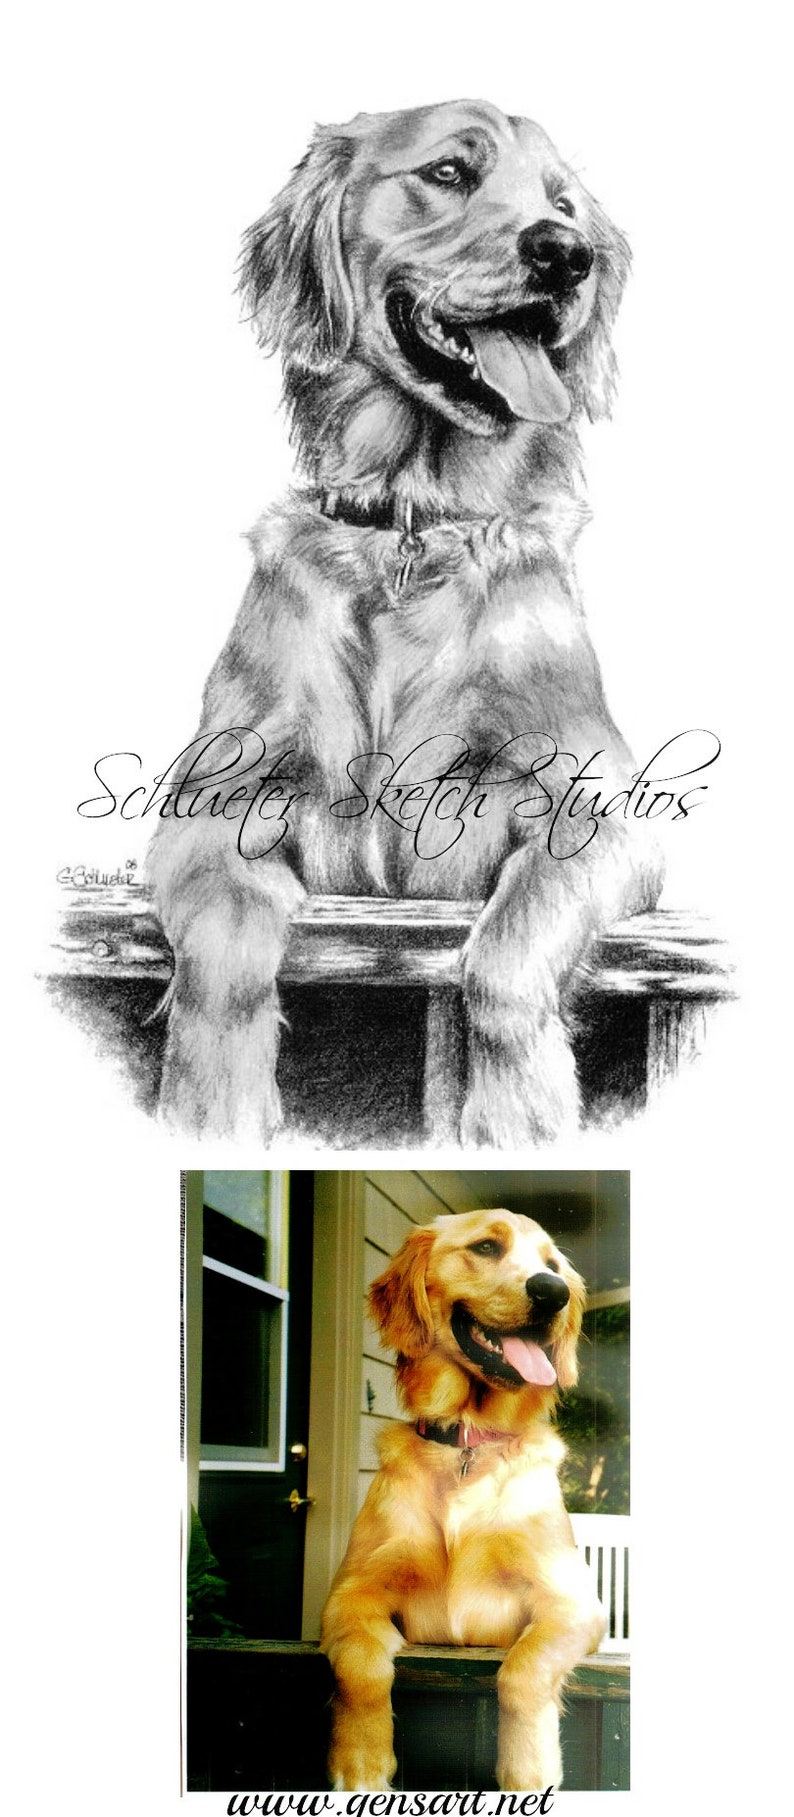 8x10 Golden Retriever Hand Drawn Pencil Sketch From Photo Customized Art Mom Gifts Lifelike Pet Portrait image 5